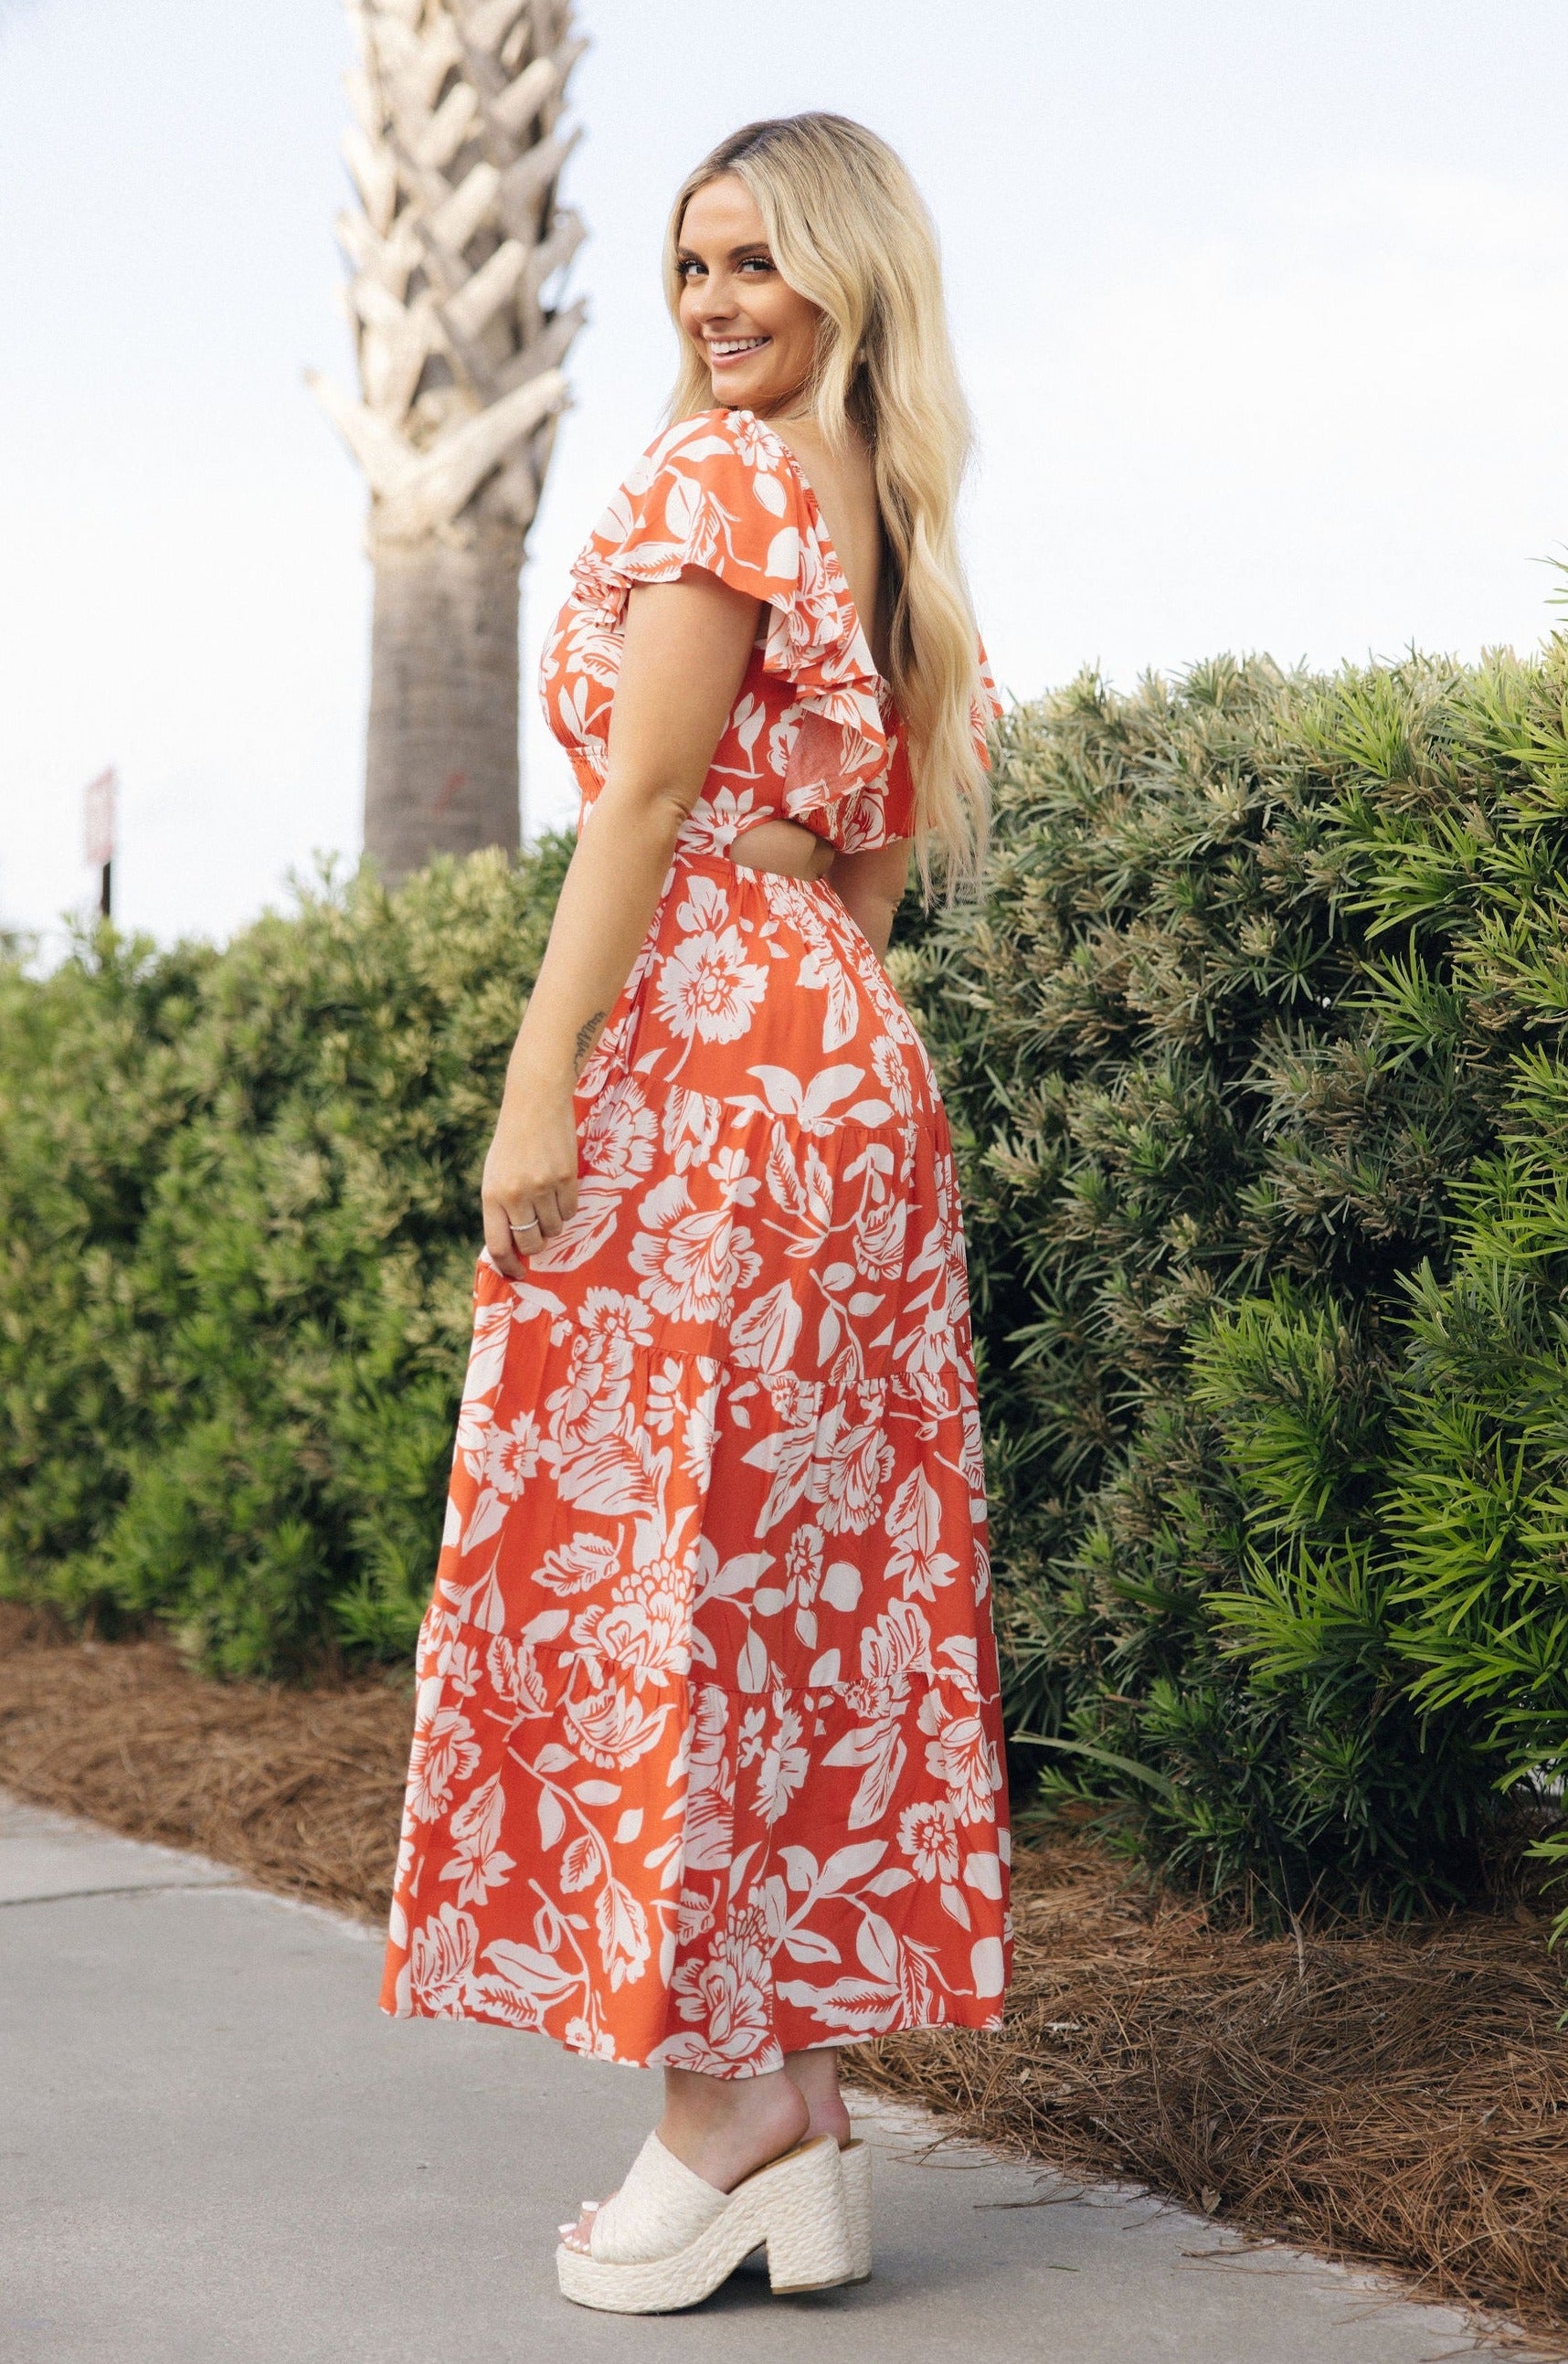 Full body side view of female model wearing the Elena Orange & Cream Floral Midi Dress which features Orange and White Floral Design, Midi Length, Orange Thigh Length Lining, Tiered Body, Smocked Waistband, Sweetheart Neckline, Ruffle Straps and Open Back